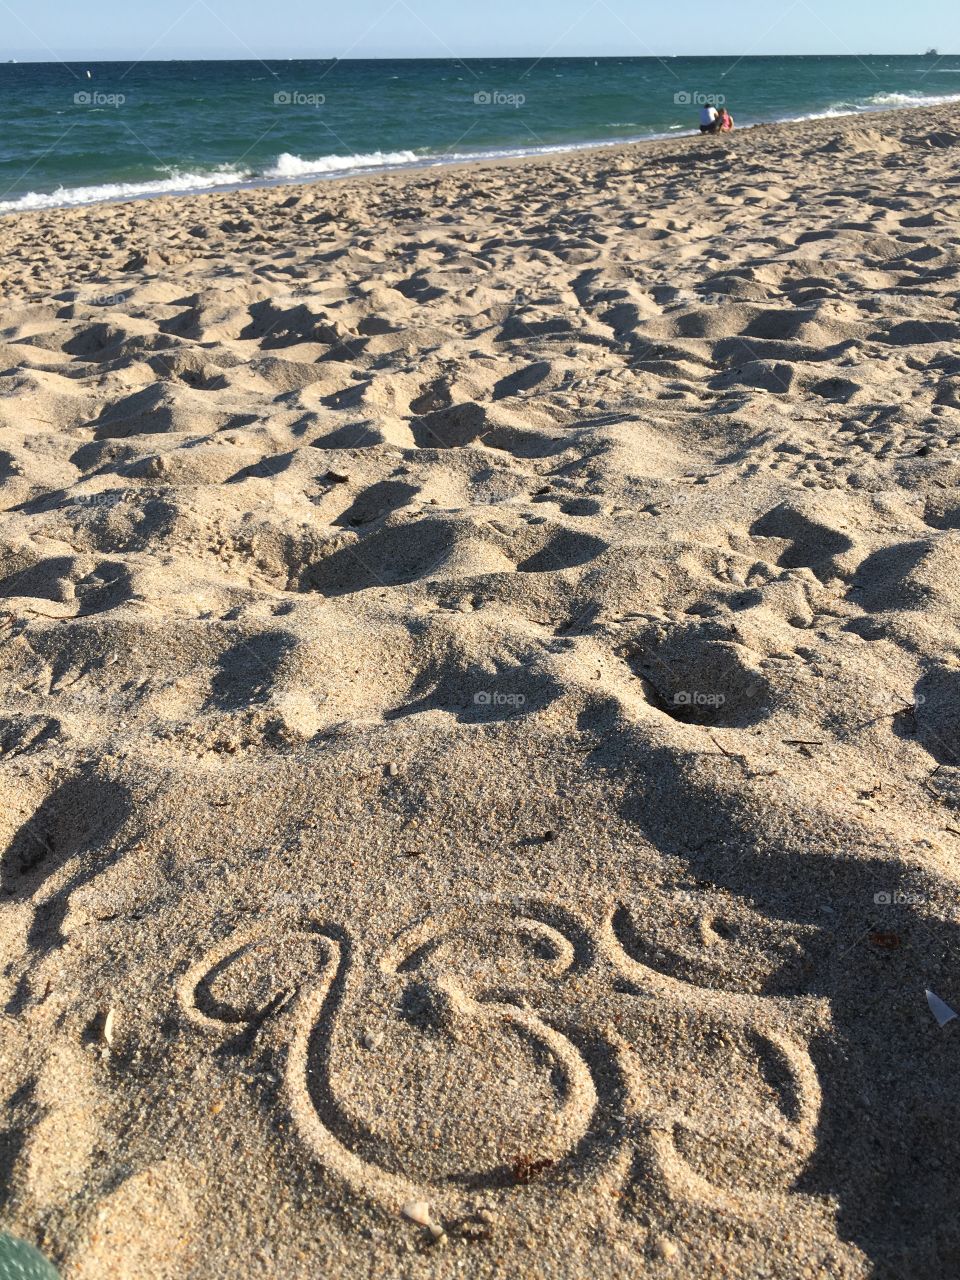 An om in the sand to remind you that the subtle vibrations of the universe vibrate for you. The sand, the water, the earth as a whole, it beats for you. 